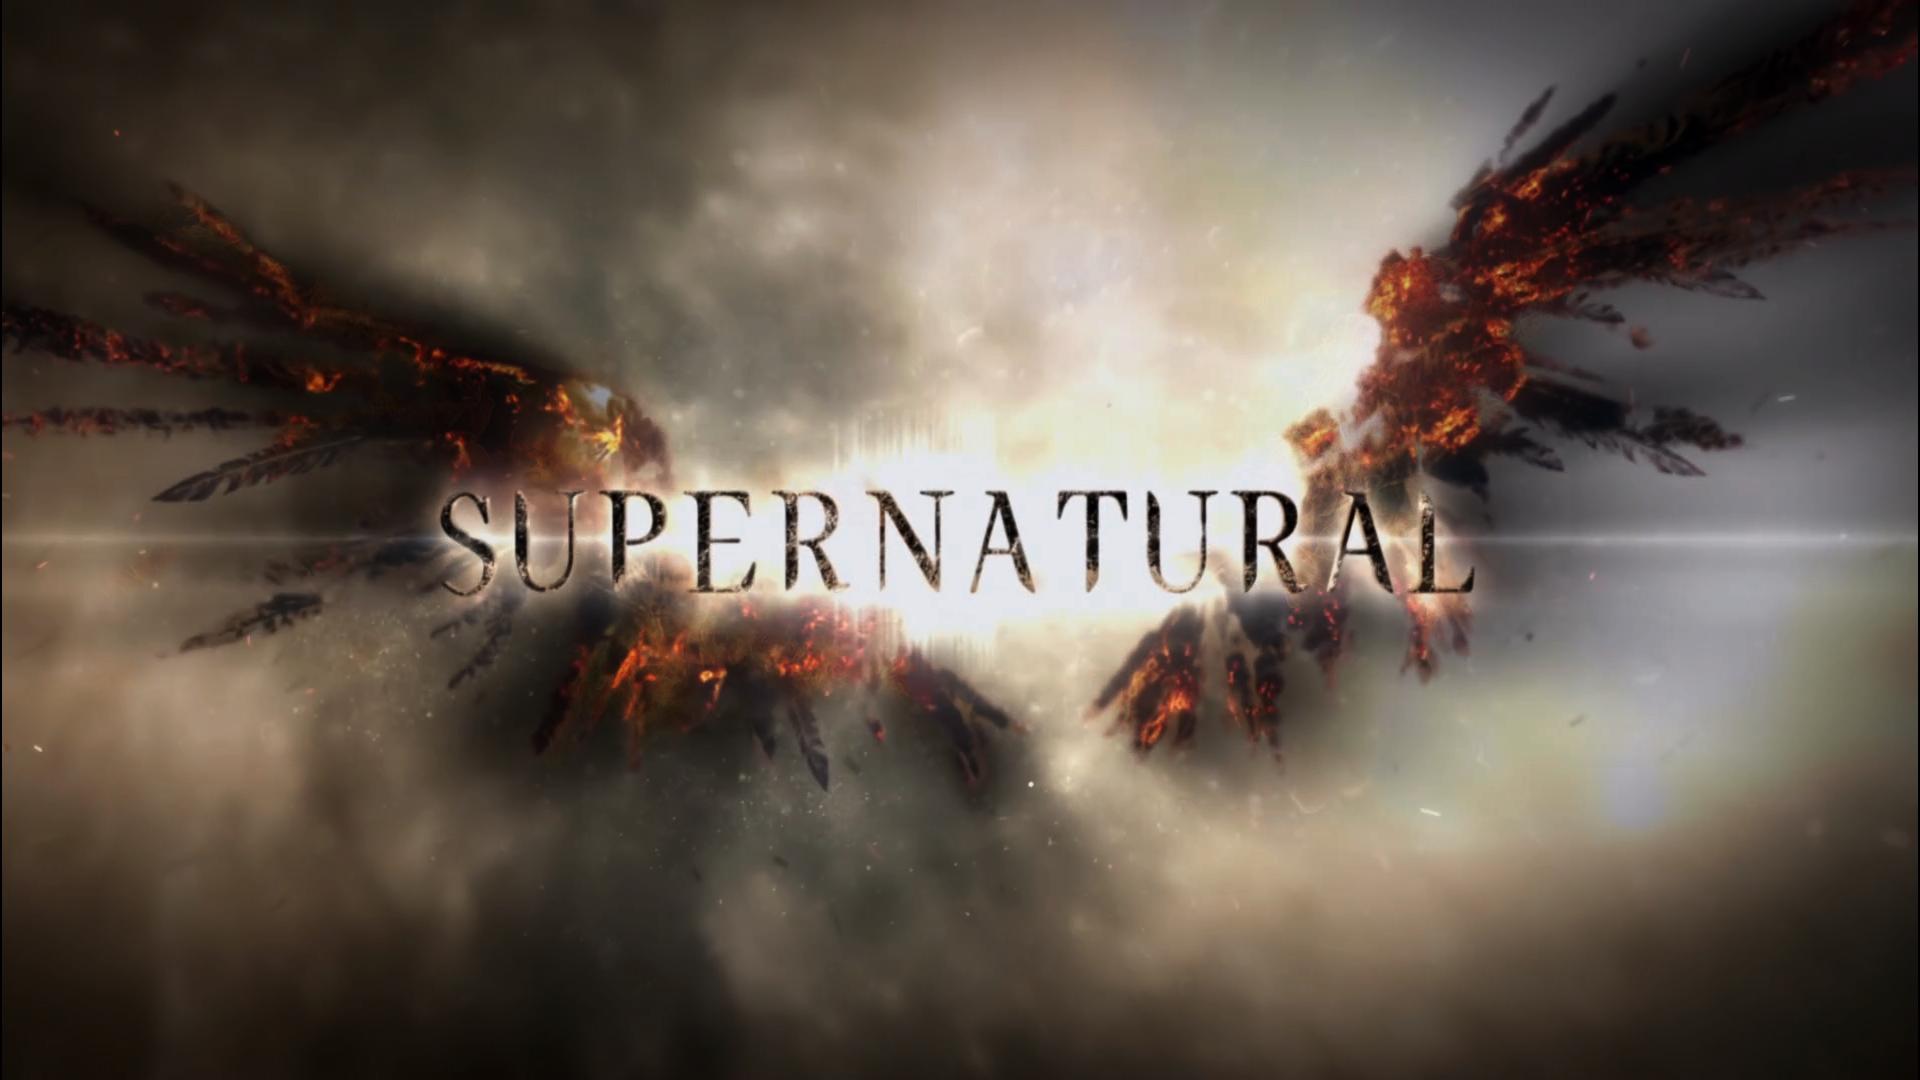 Made The Supernatural Intro Into A Wallpaper